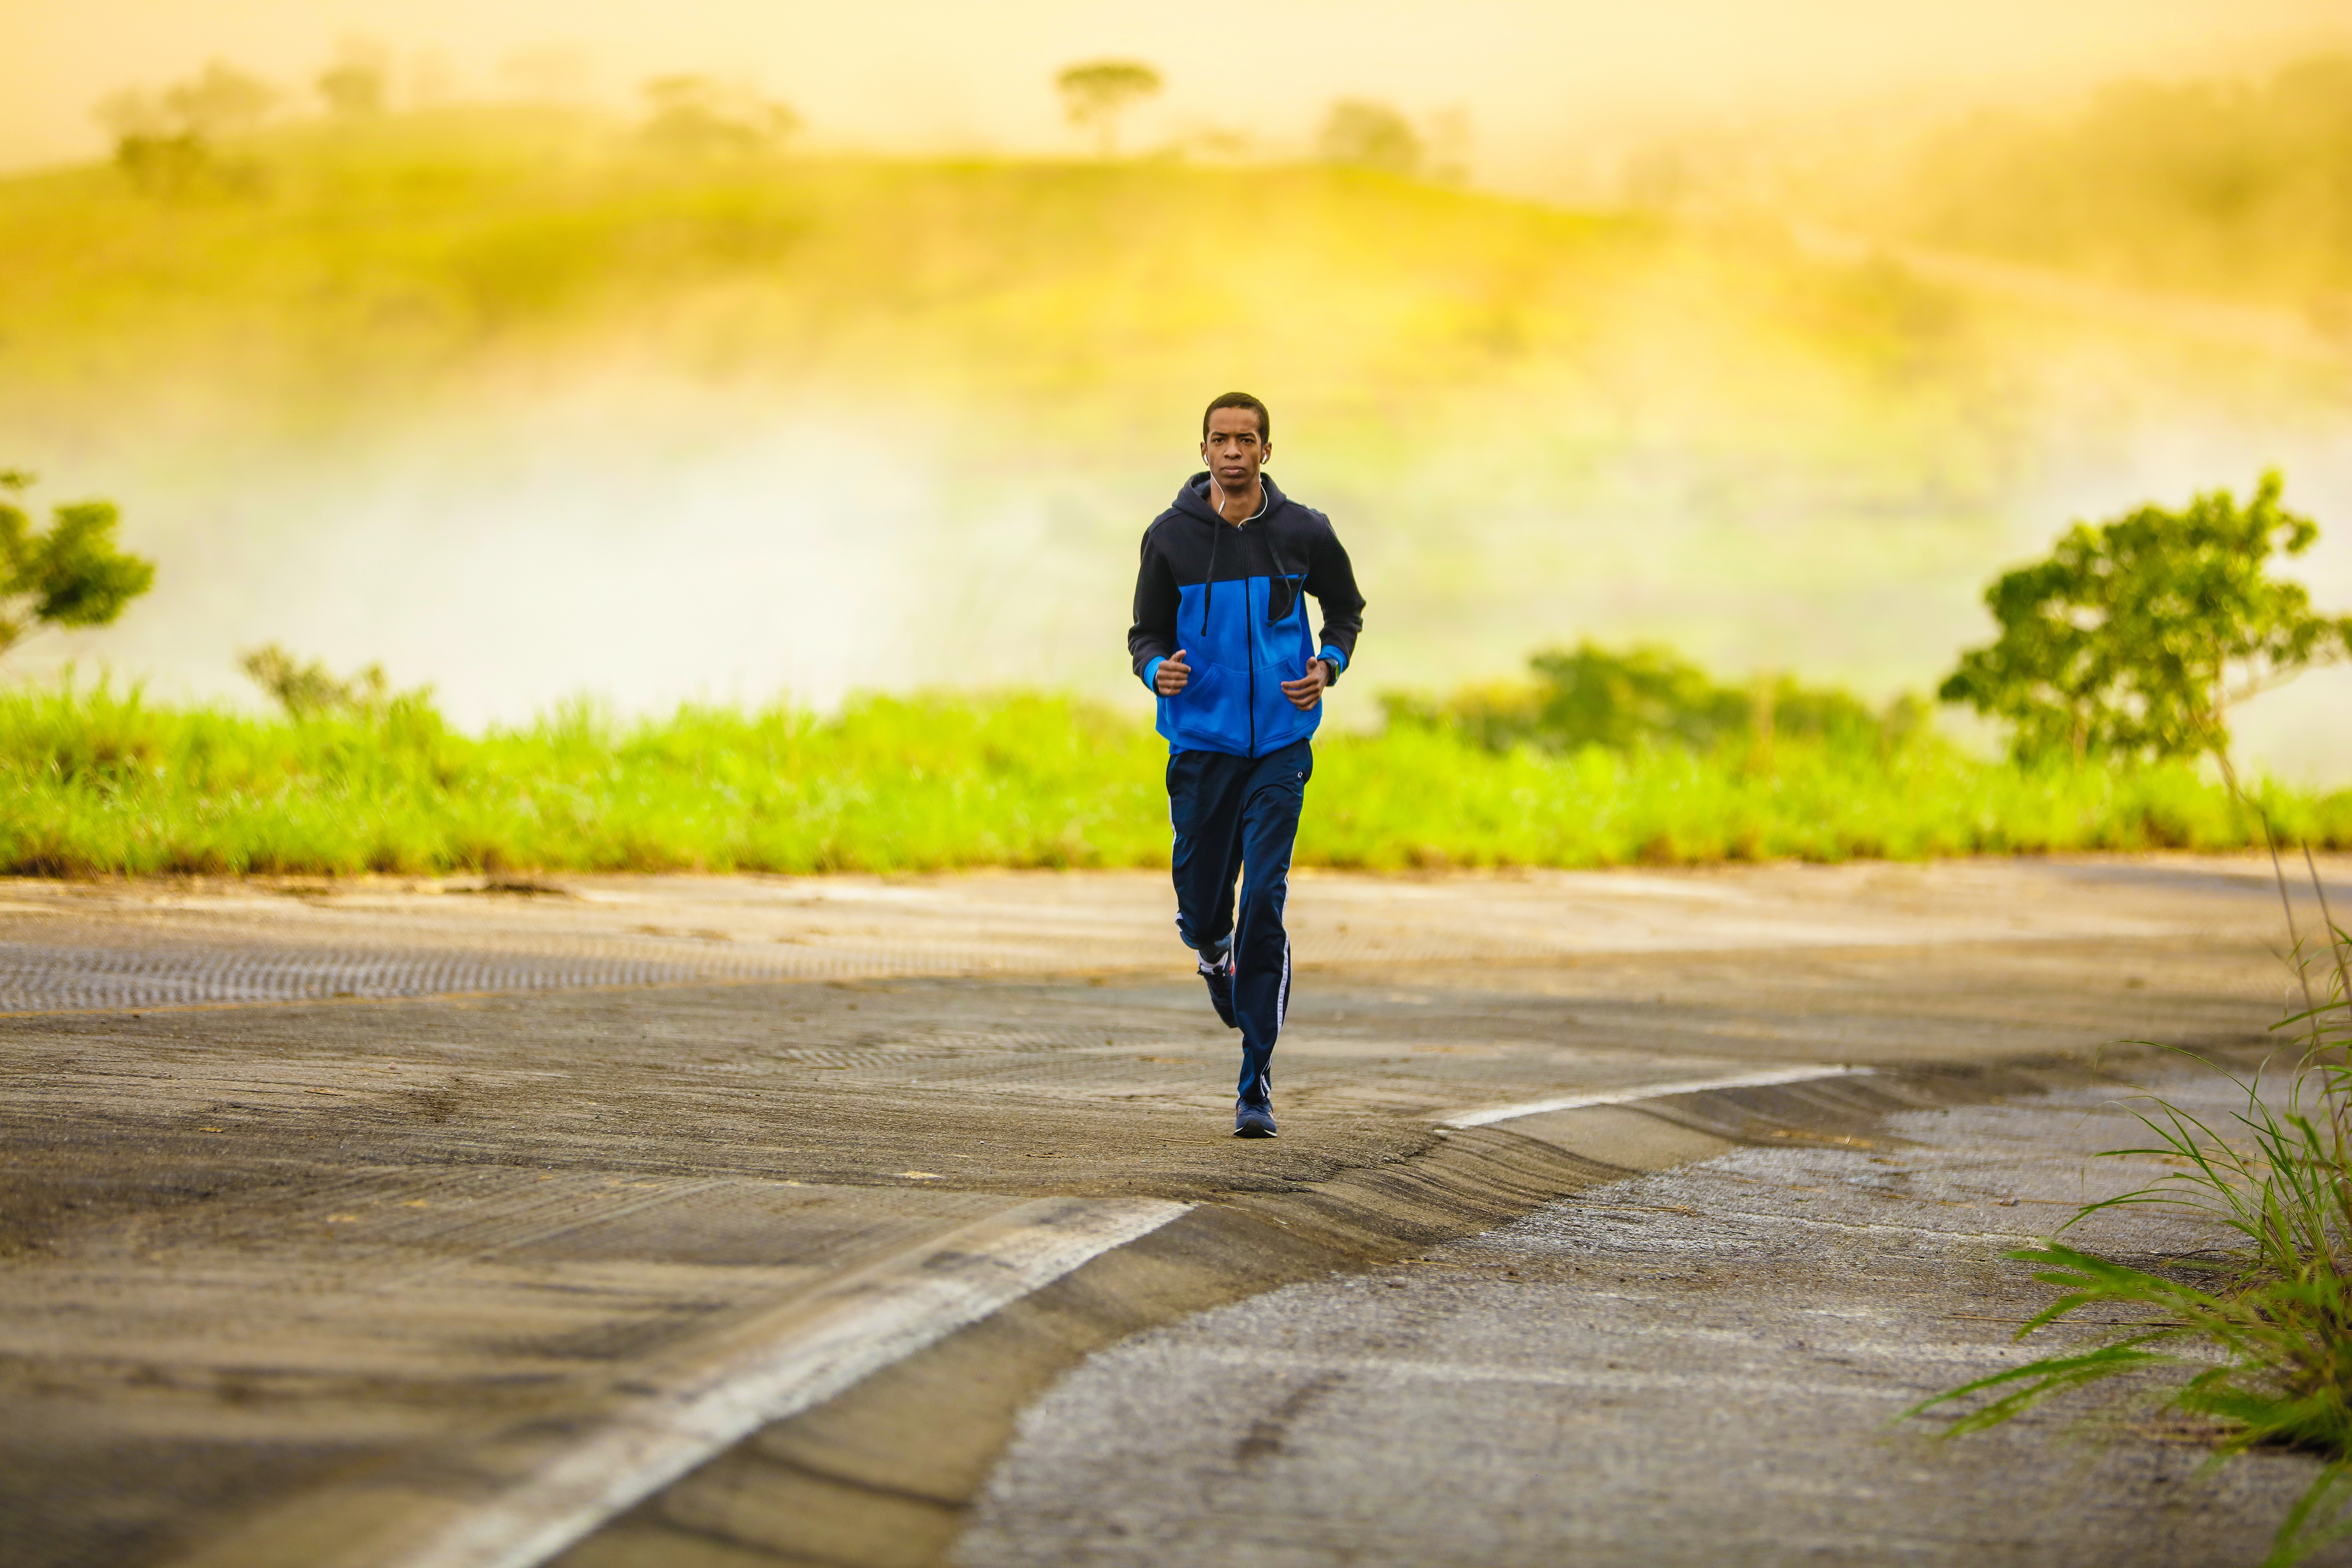 8688x5792 #person, #runner, #sportswear, #athlete, #jogging, #amazing, #grass, #sunrise, #sky, #beautiful, #outdoors, #road, #street, #sunset, #athletic, #exercise, #man, #running, #male, #Public domain image, #keep fit. Mocah HD Wallpaper